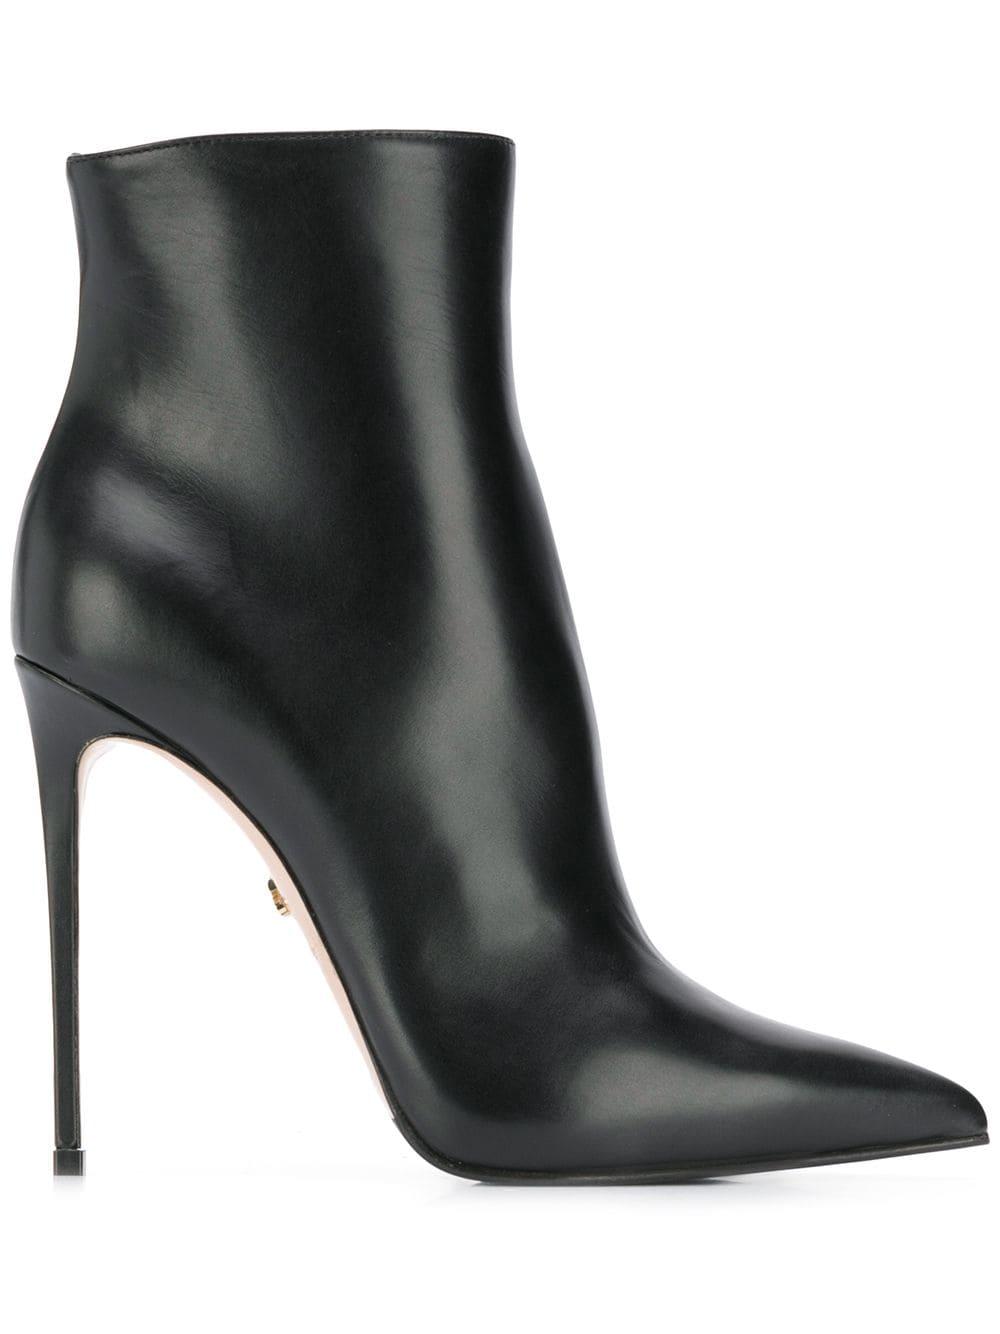 Le Silla Leather Eva Ankle Boot in Black Lyst